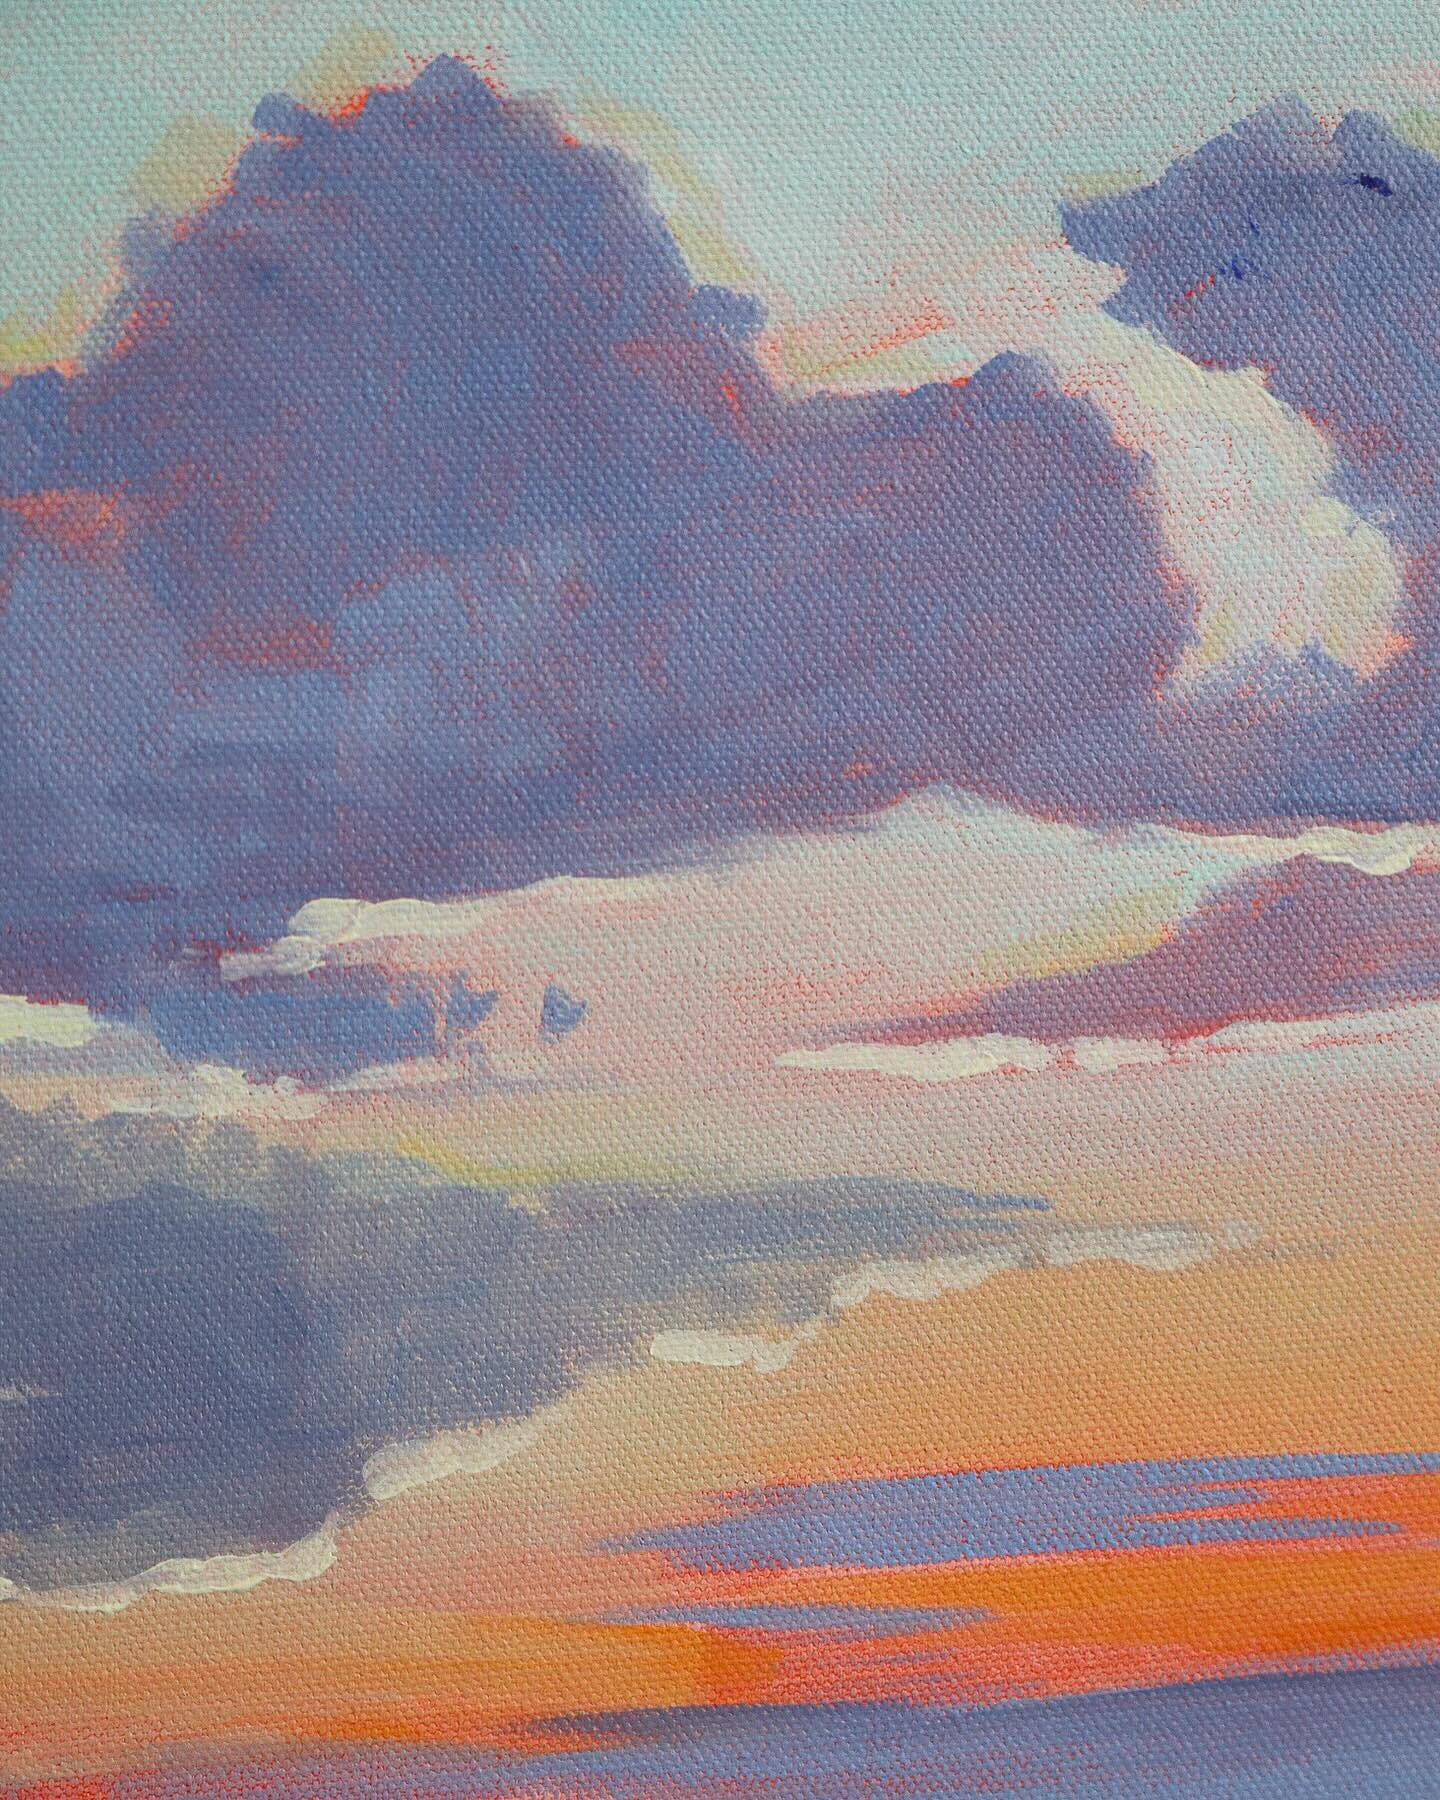 Some closeups of a sky I've been working on lately! 🌅🧡

#charlestonartist #sunsetpainting